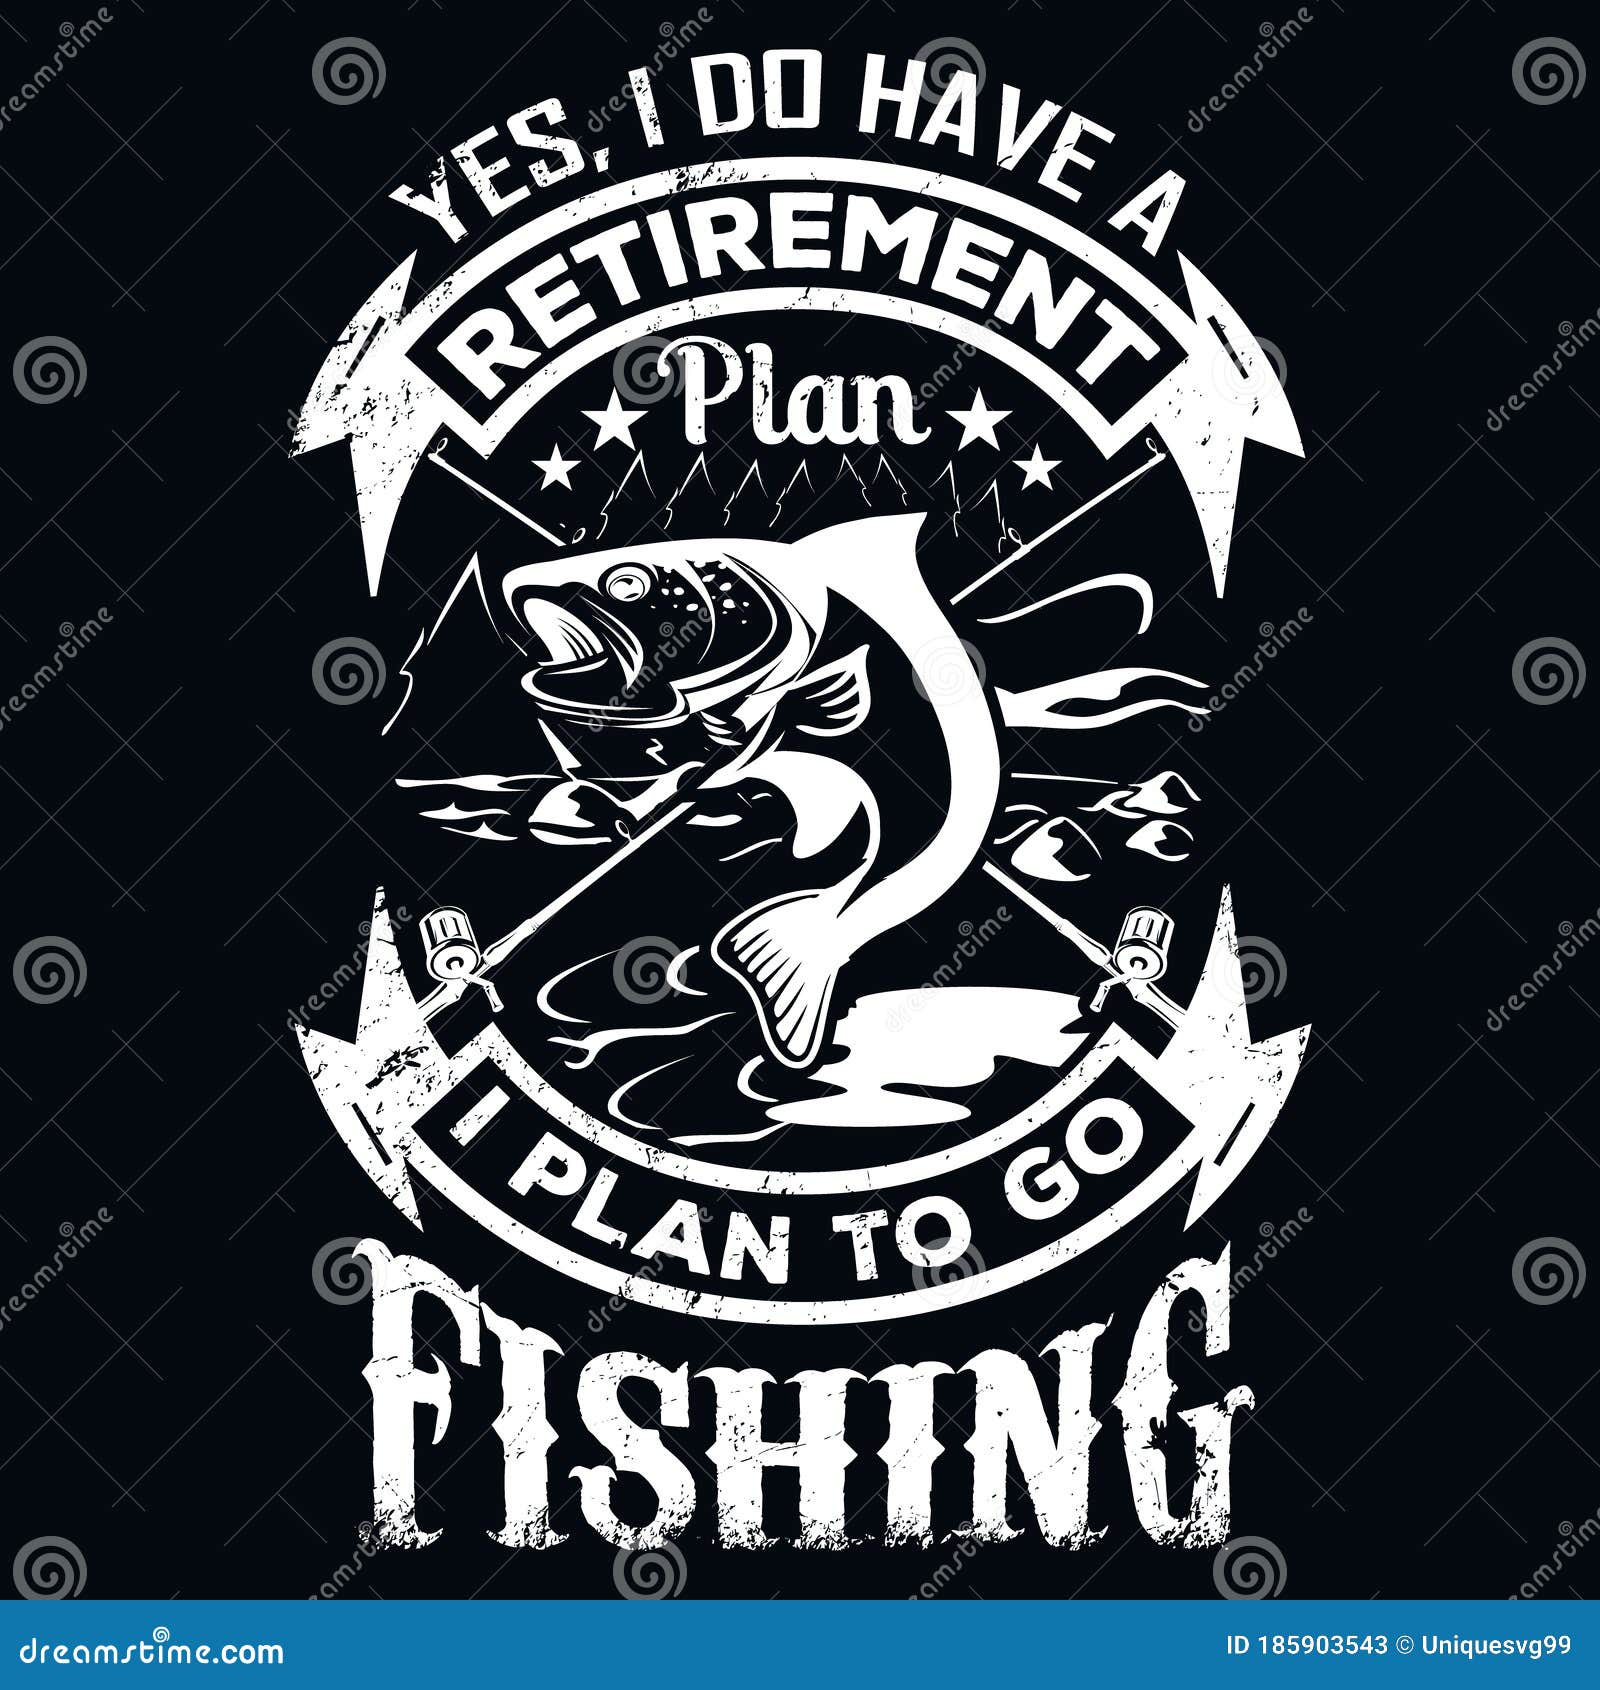 Fishing T Shirts Design,Vector Graphic, Typographic Poster or T